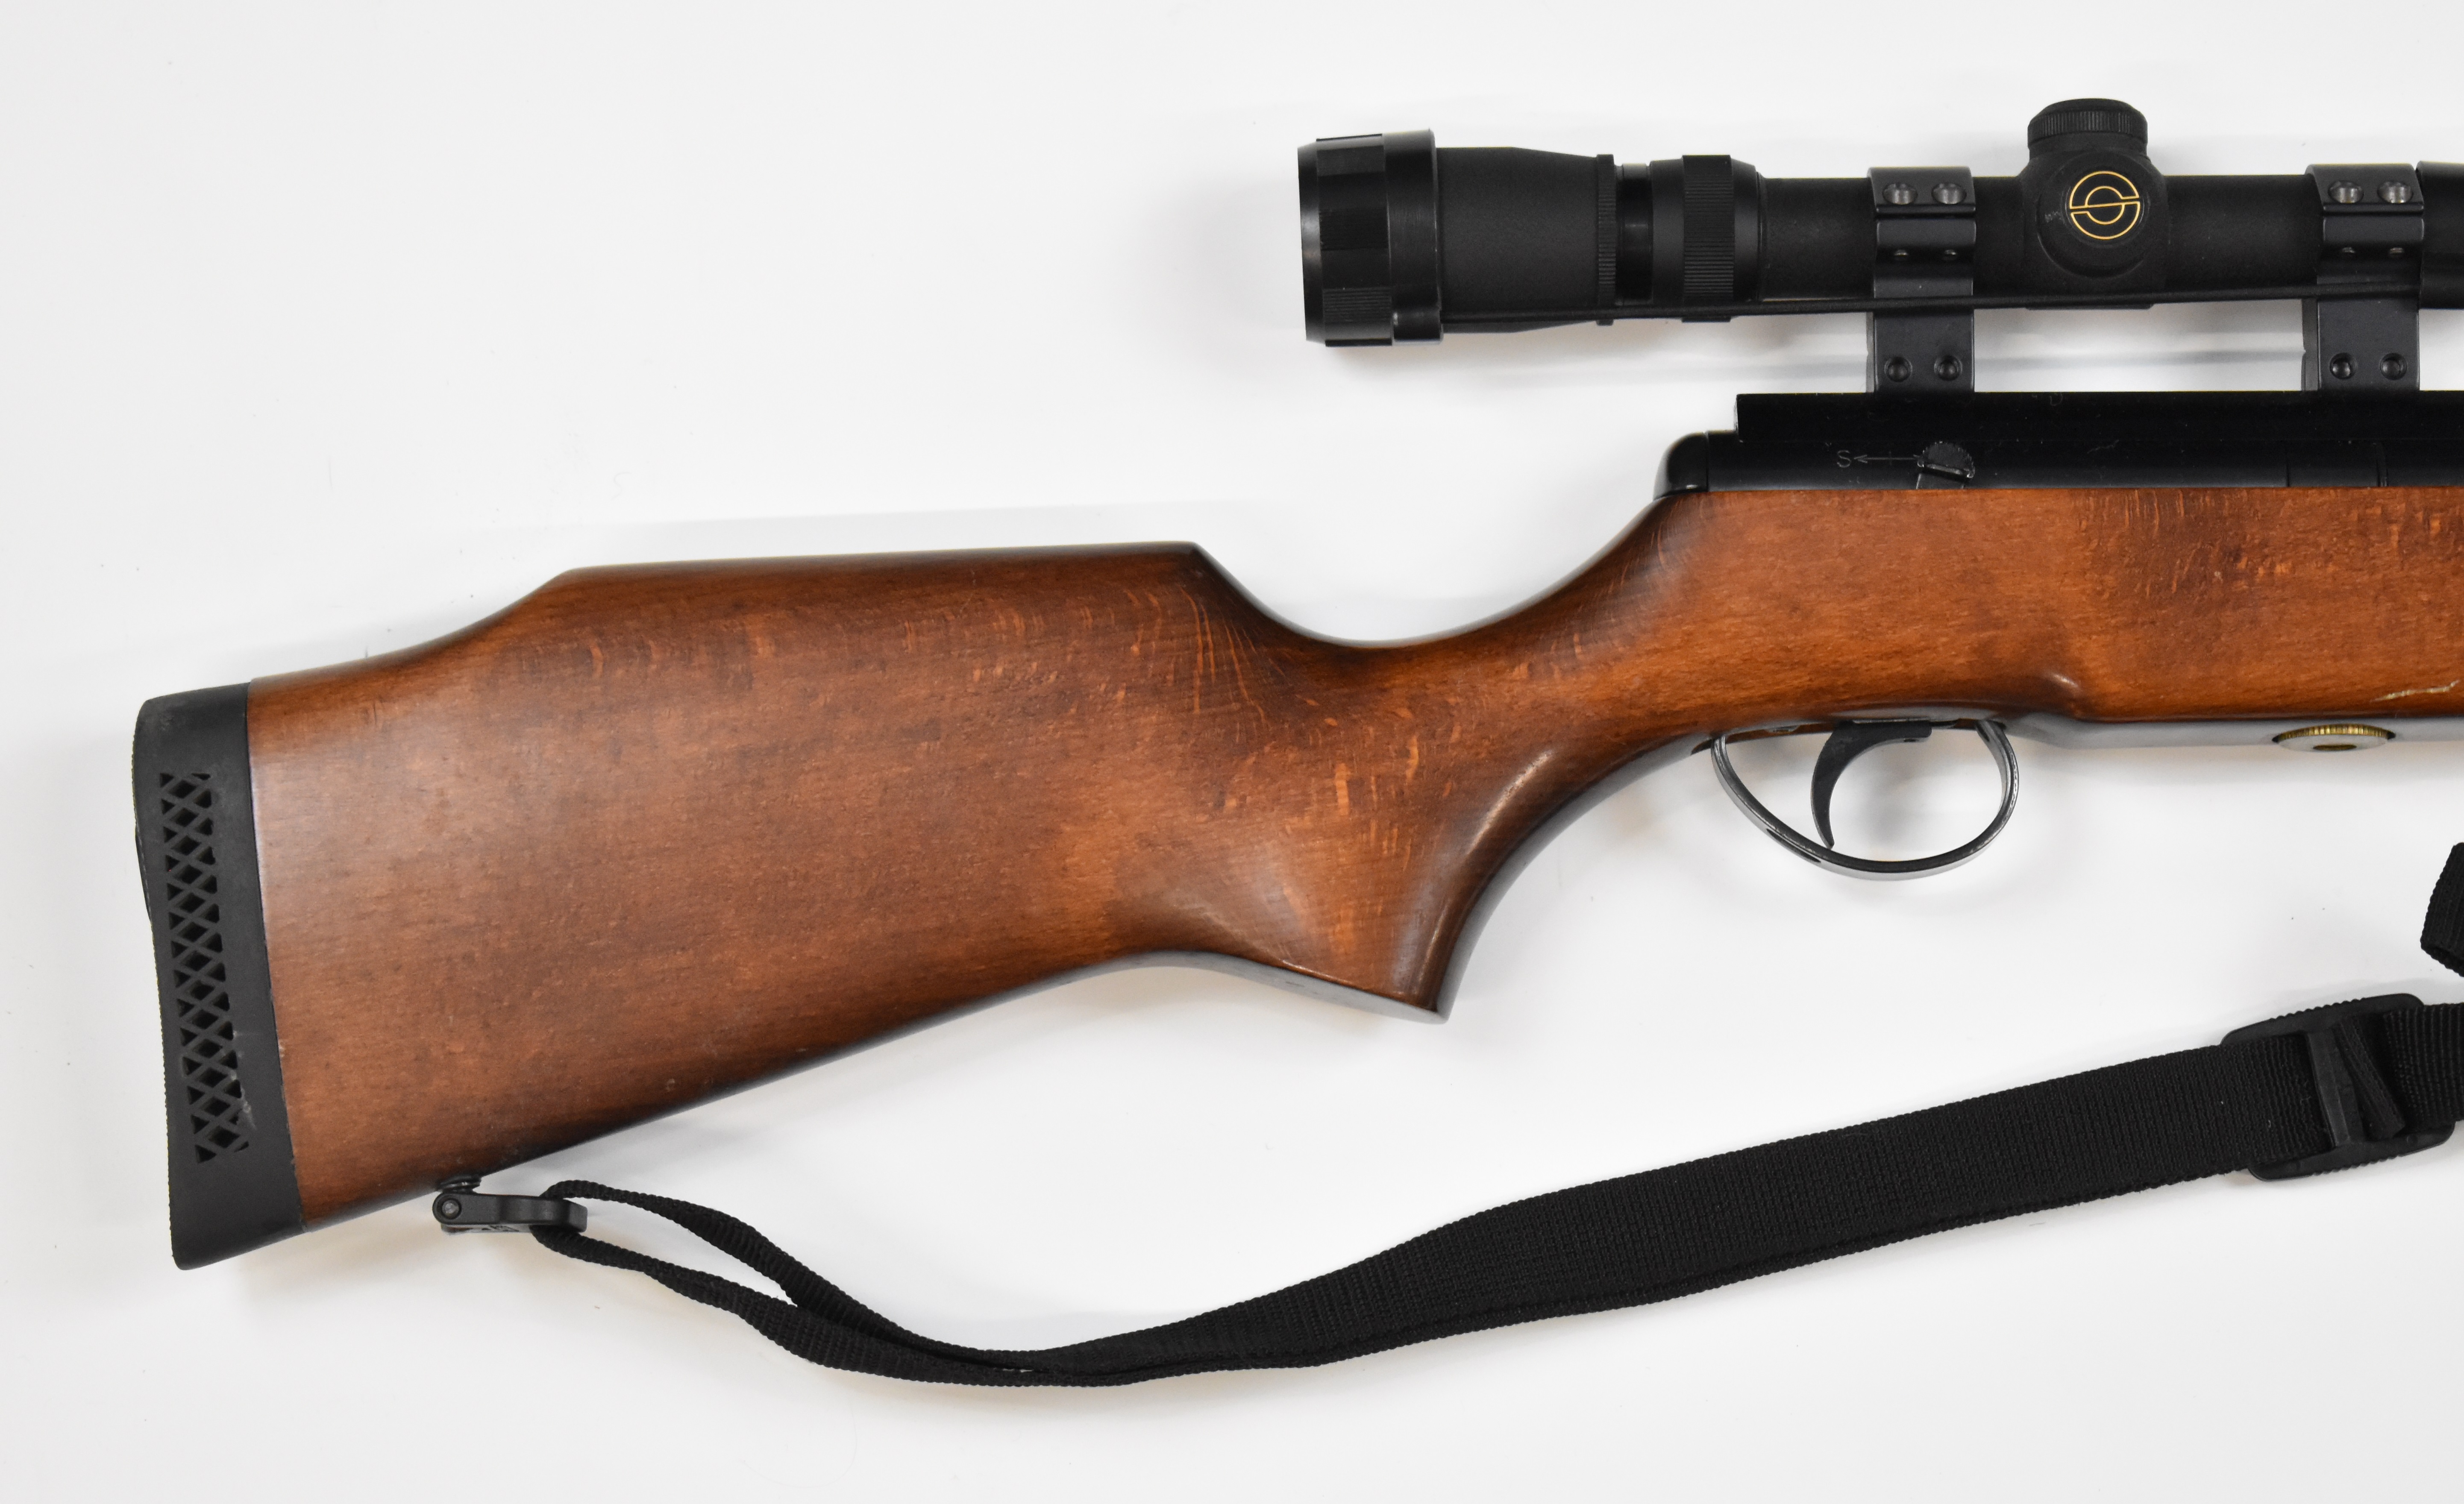 BSA Spitfire .22 air rifle with semi-pistol grip, raised cheek piece, sling, sound moderator and - Image 3 of 9